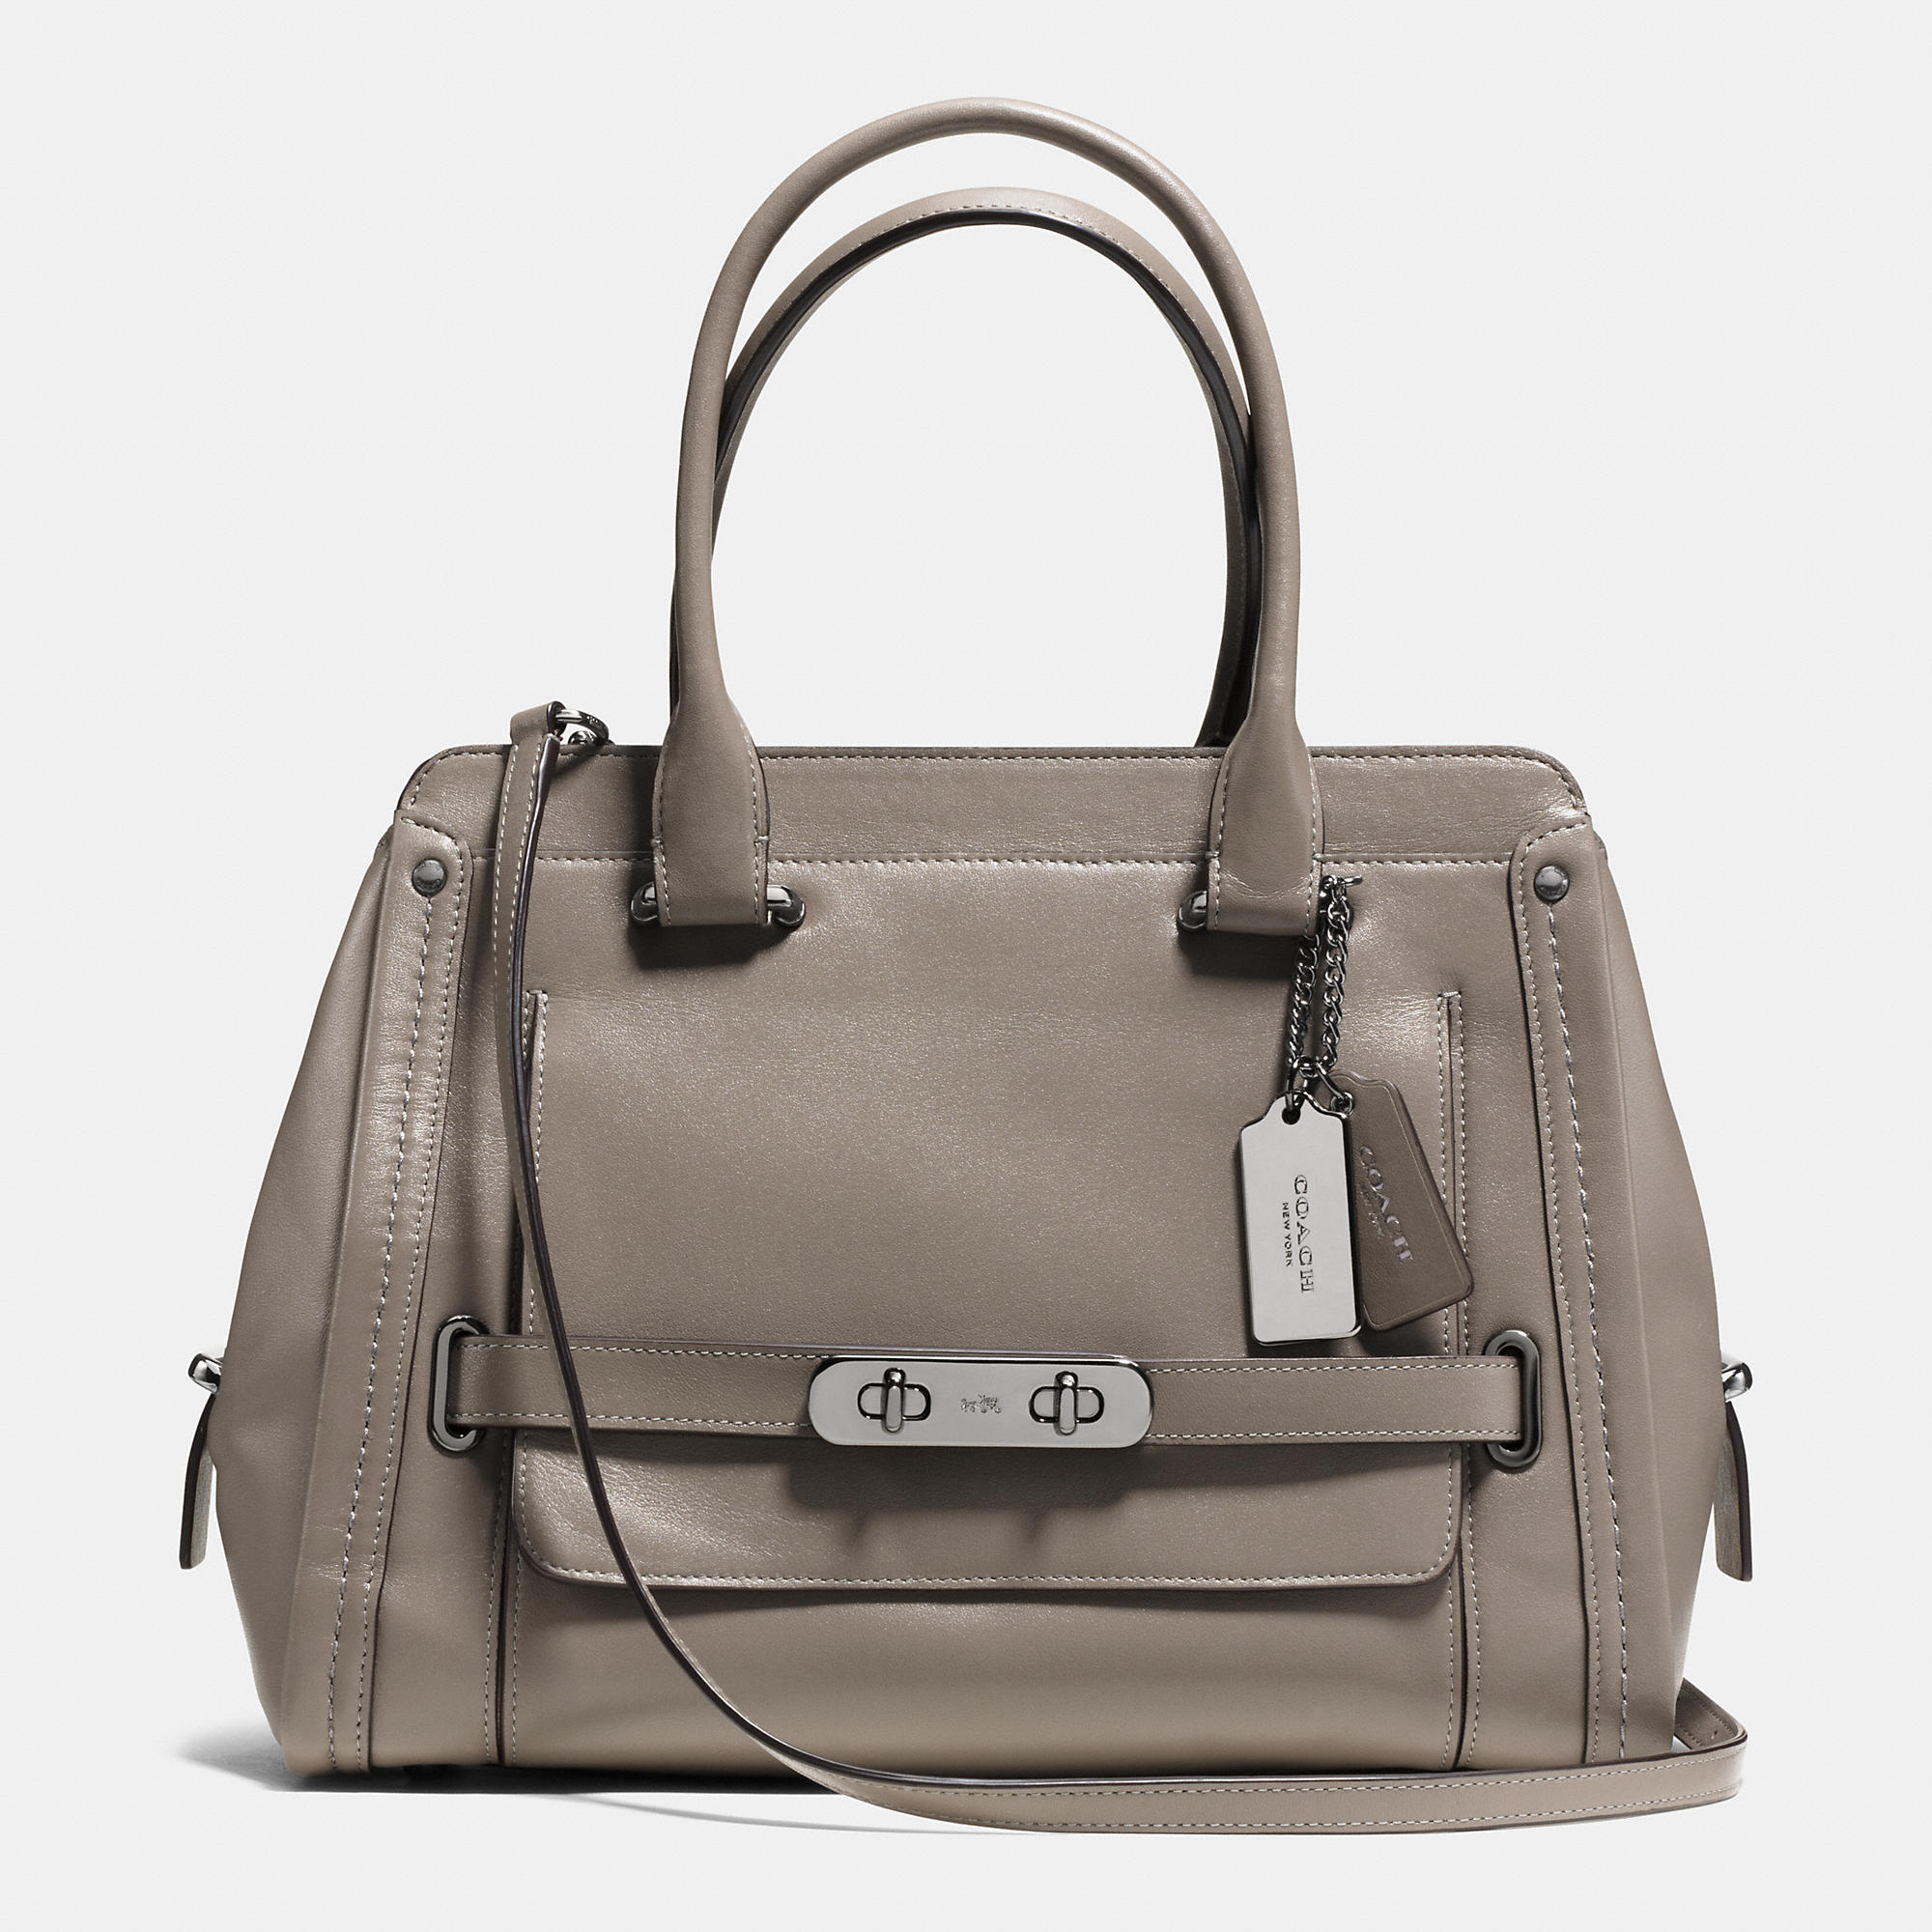 Leisure Fashion Coach Swagger Frame Satchel In Calf Leather | Coach Outlet Canada